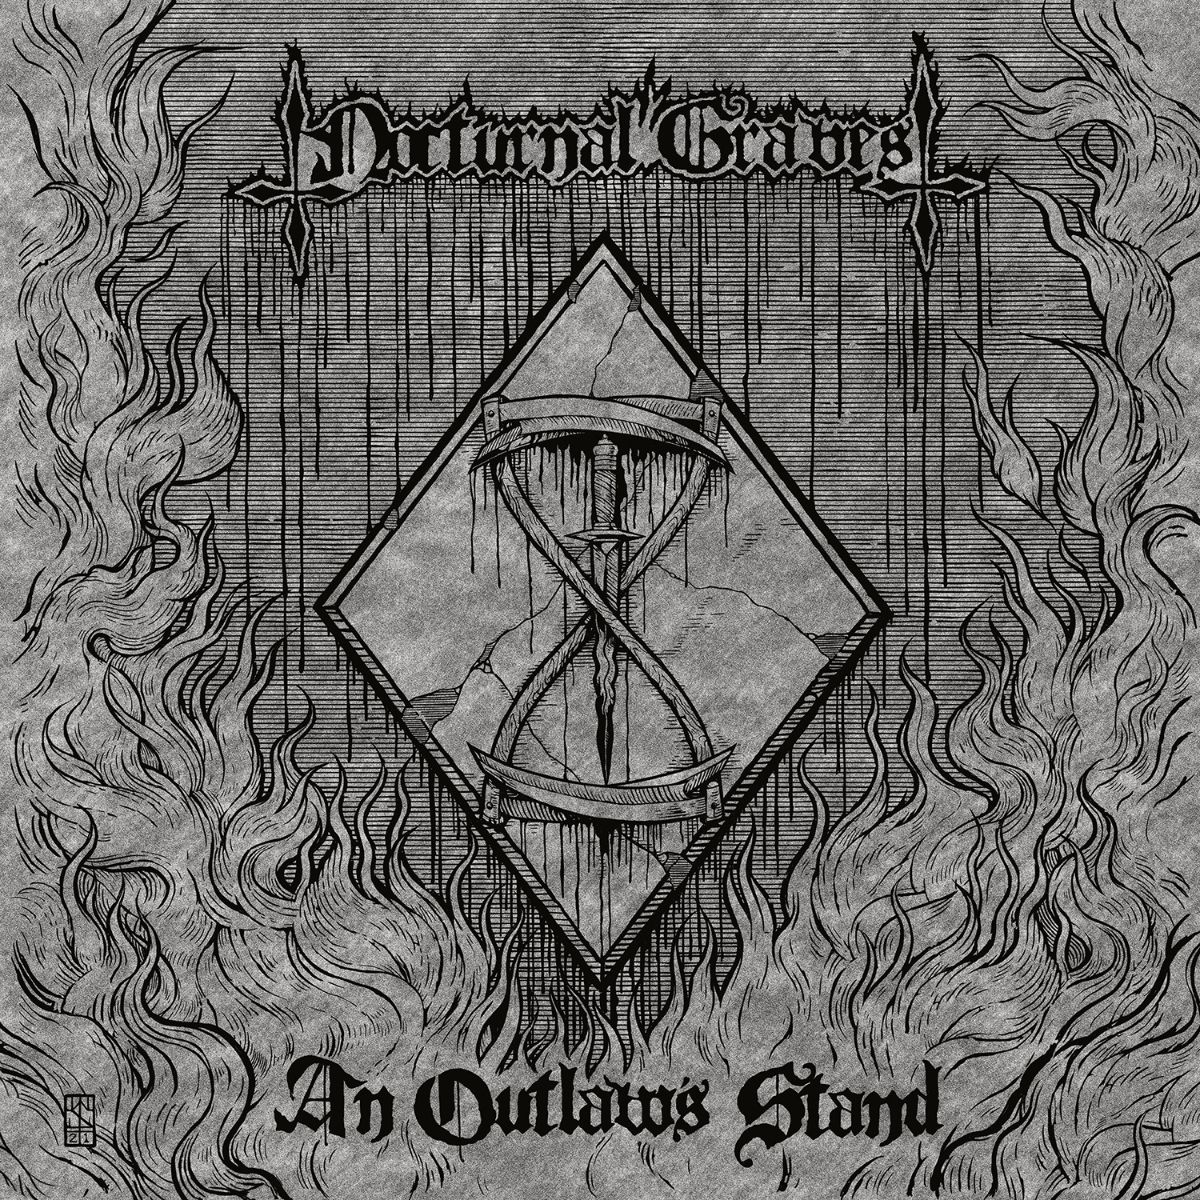 NOCTURNAL GRAVES stream full album 'An Outlaw's Stand'! The blackened death metal stalwarts of NOCTURNAL GRAVES are now streaming their entire upcoming album ahead of it's release date!